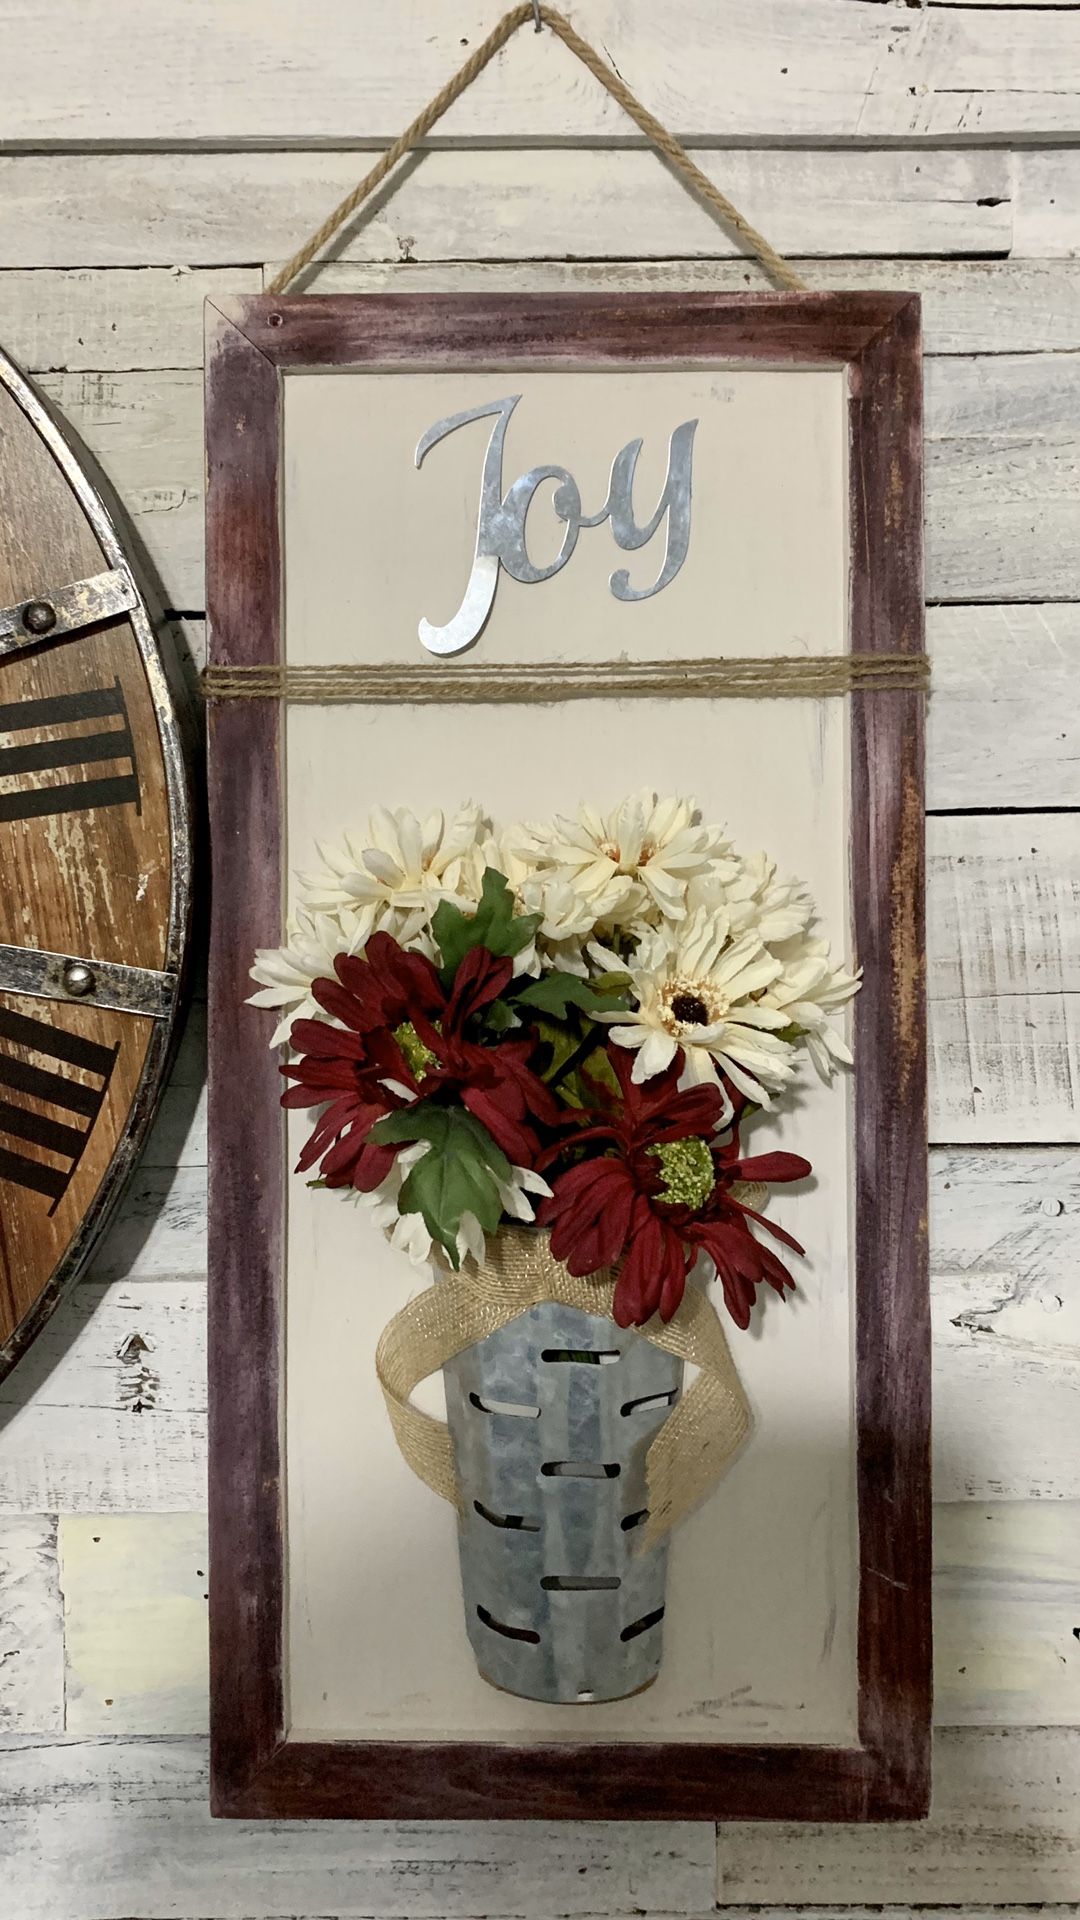 Farmhouse / wood / hanging / floral / wall decor